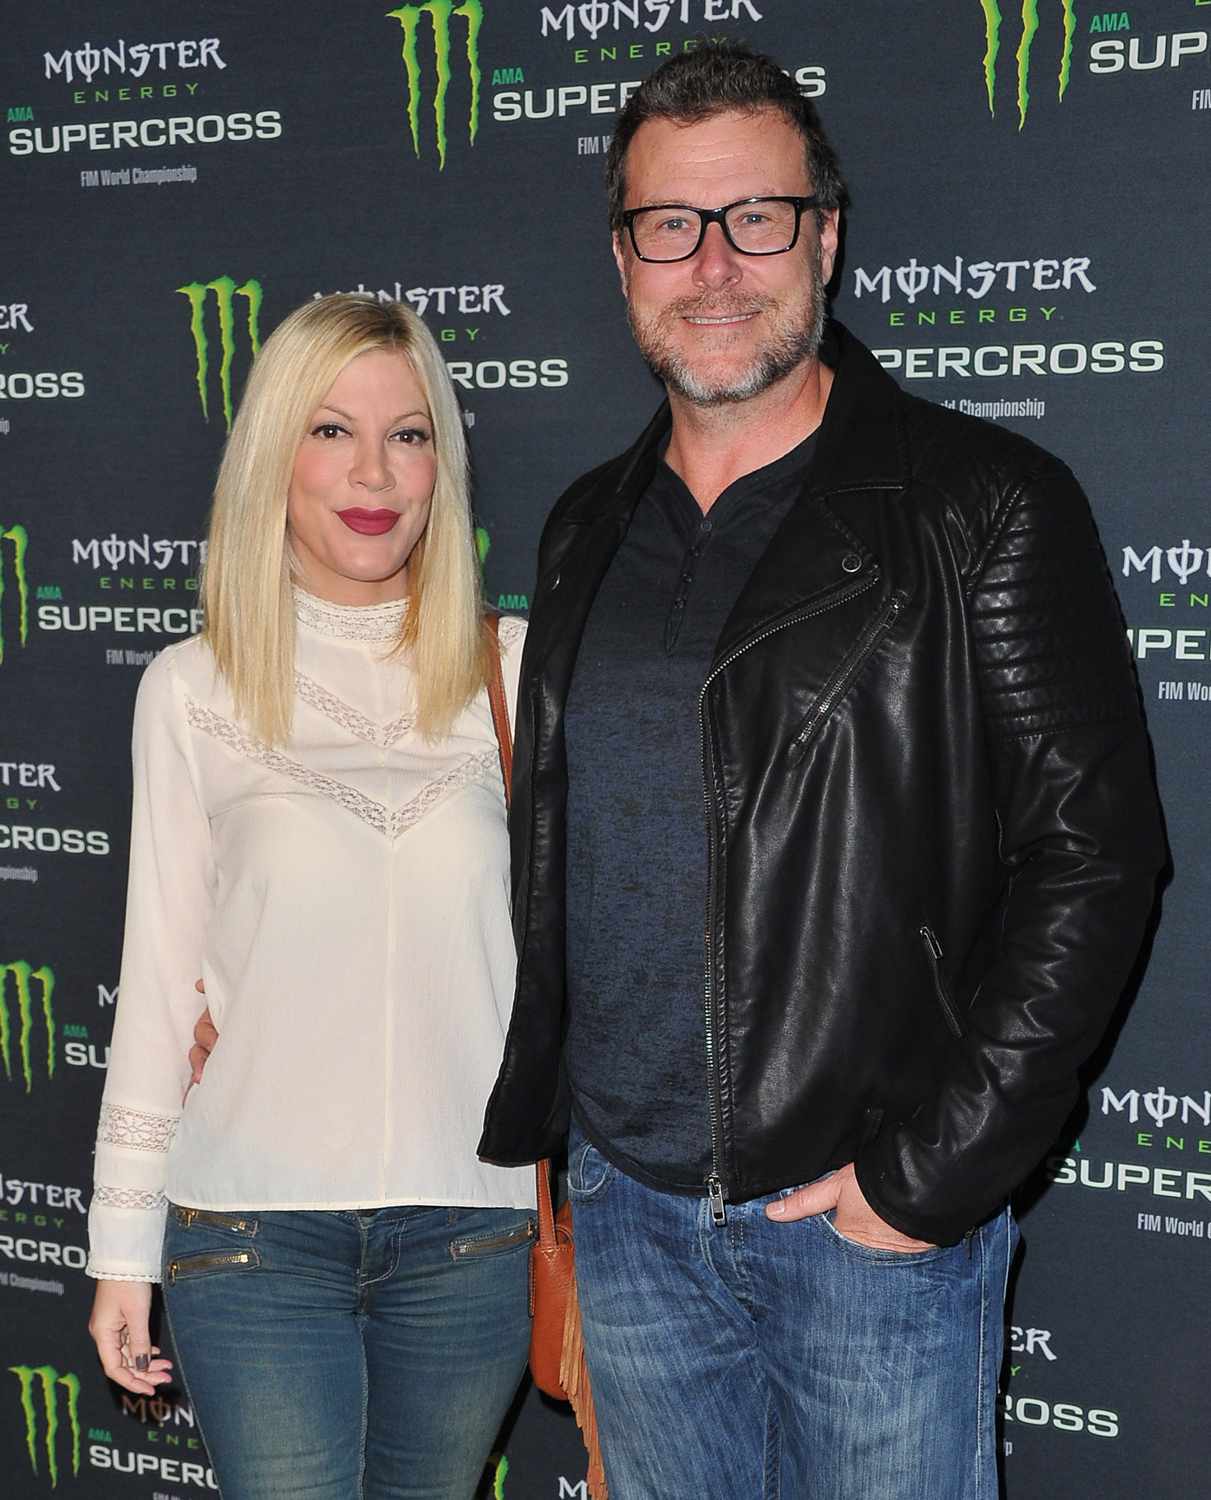 Actress Tori Spelling and actor Dean McDermott attend Monster Energy Supercross at Angel Stadium of Anaheim on January 23, 2016 in Anaheim, California. 